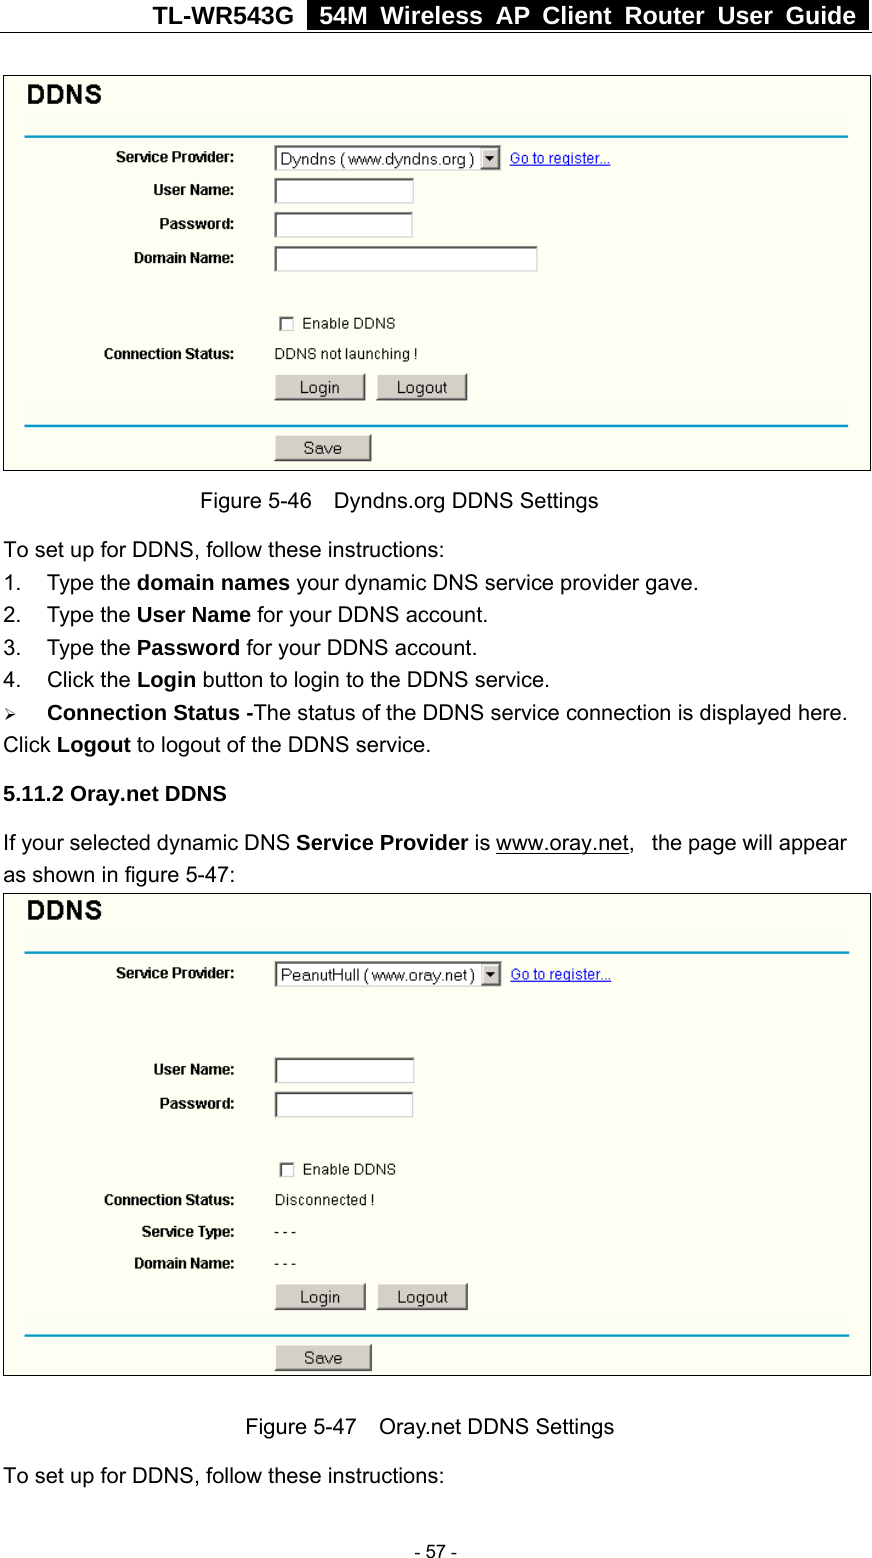 TL-WR543G   54M Wireless AP Client Router User Guide   Figure 5-46    Dyndns.org DDNS Settings To set up for DDNS, follow these instructions: 1. Type the domain names your dynamic DNS service provider gave.   2. Type the User Name for your DDNS account.   3. Type the Password for your DDNS account.   4. Click the Login button to login to the DDNS service. ¾ Connection Status -The status of the DDNS service connection is displayed here. Click Logout to logout of the DDNS service. 5.11.2 Oray.net DDNS If your selected dynamic DNS Service Provider is www.oray.net,   the page will appear as shown in figure 5-47:   Figure 5-47    Oray.net DDNS Settings To set up for DDNS, follow these instructions:  - 57 - 